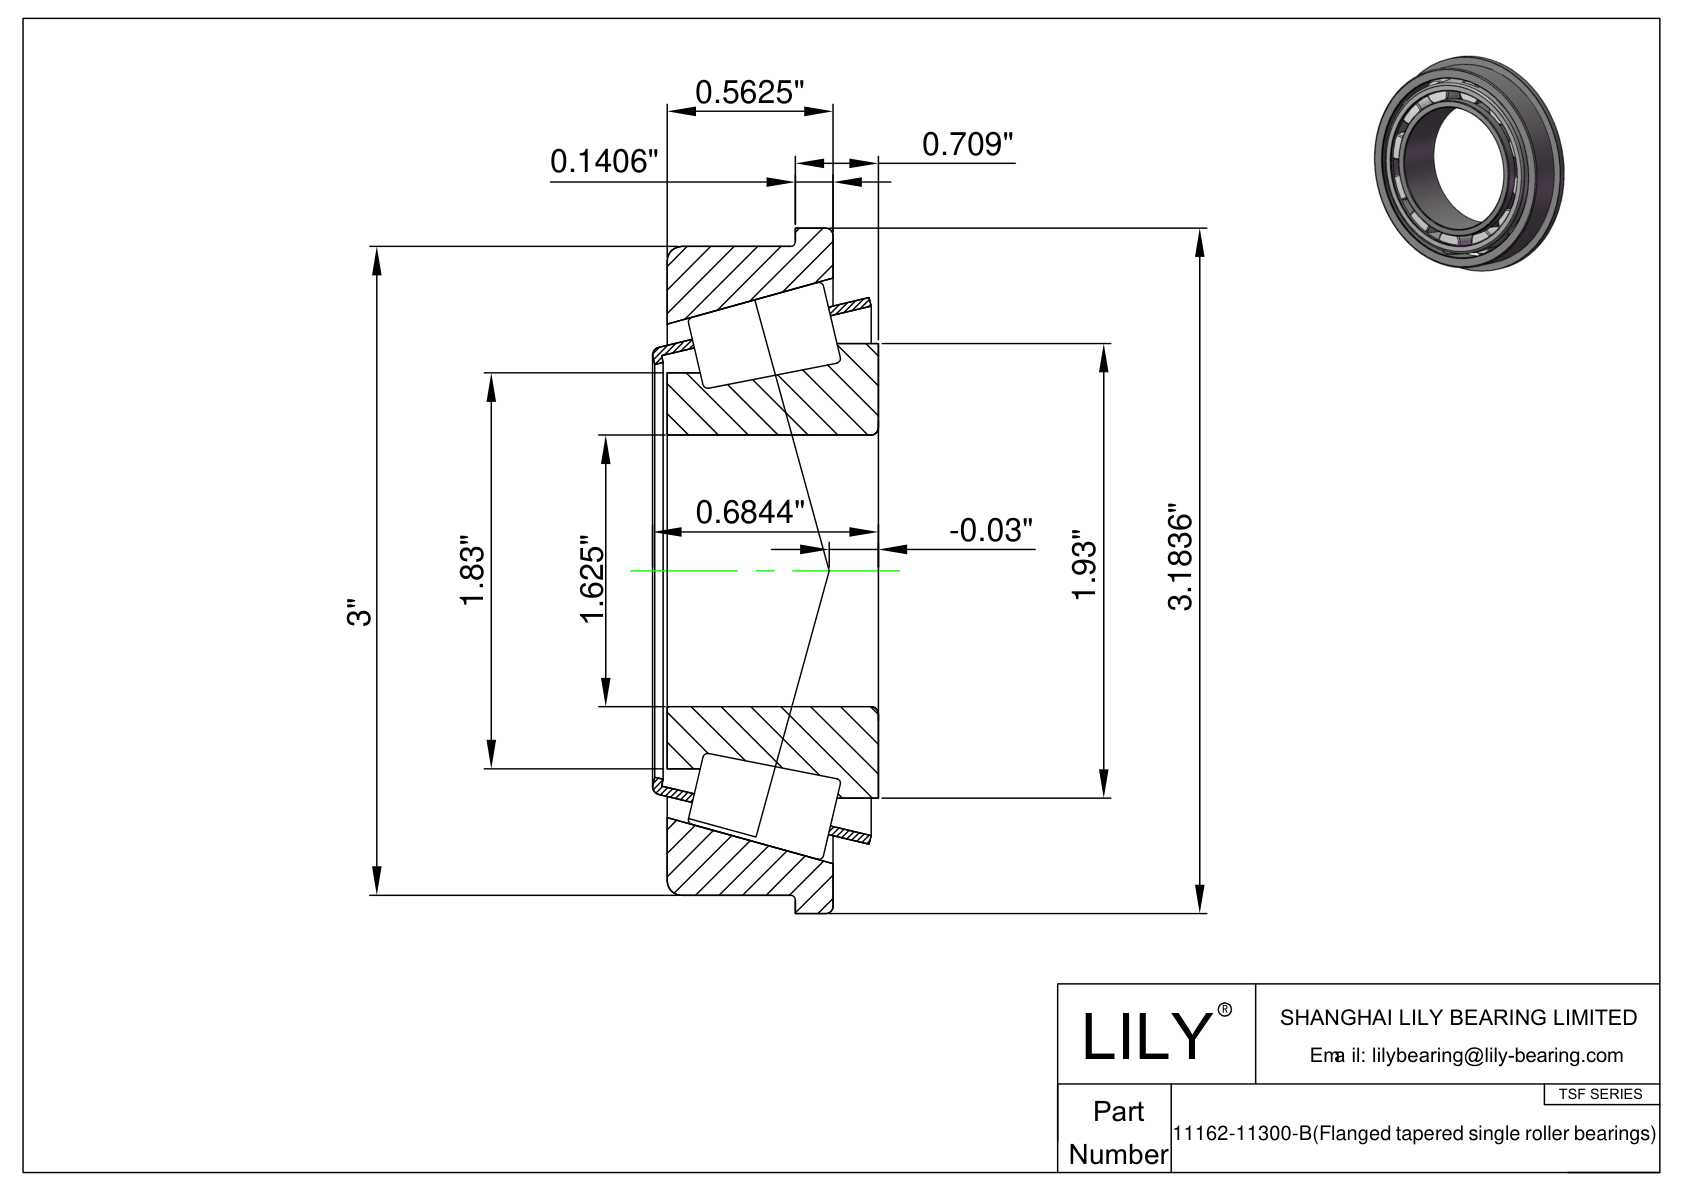 11162-11300-B TSF (Tapered Single Roller Bearings with Flange) (Imperial) cad drawing